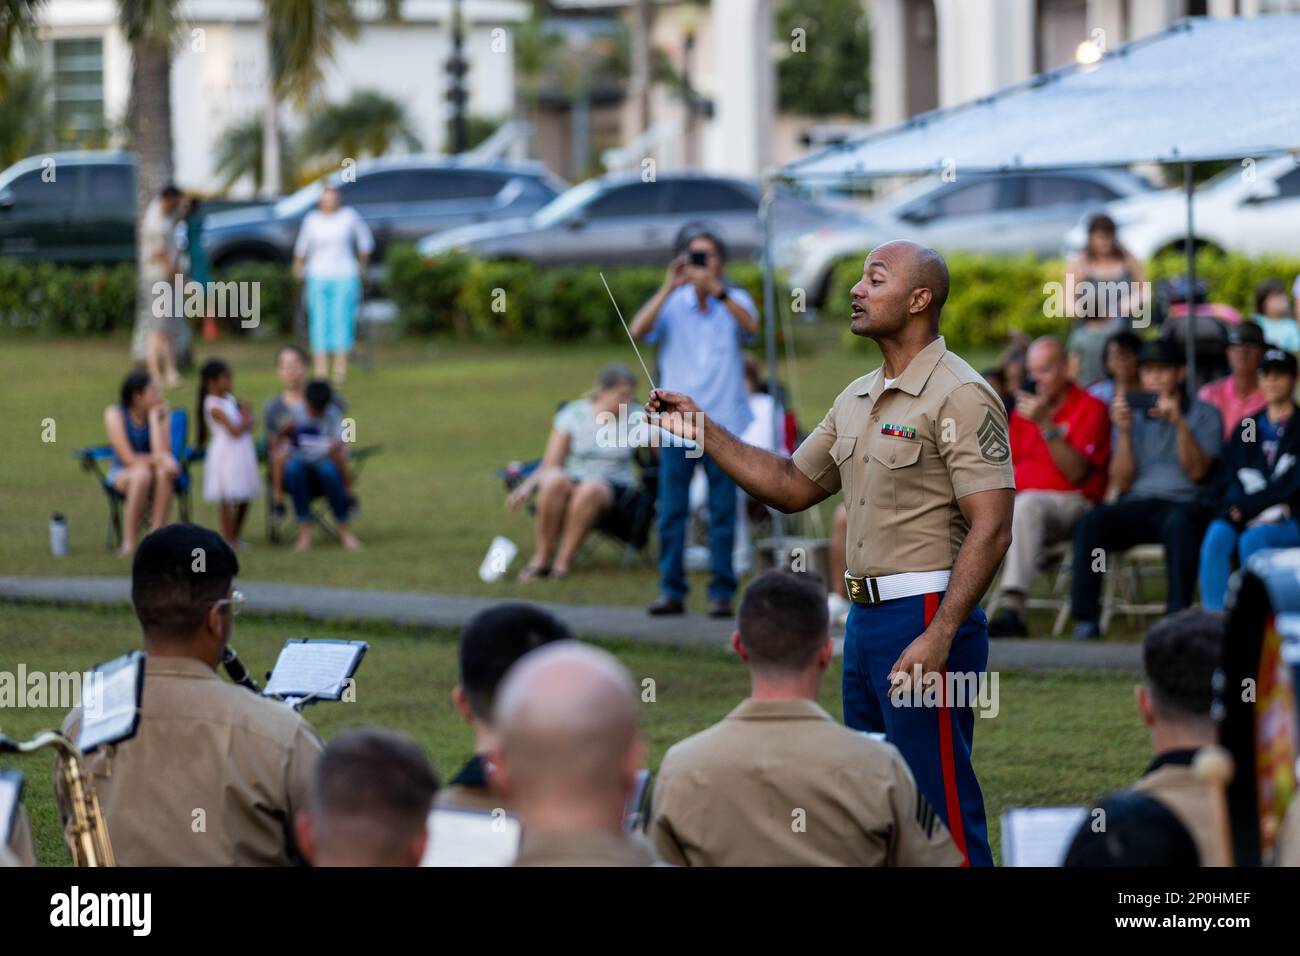 U.S. Marine Corps Staff Sgt. Uiliami Fihaki, an enlisted conductor with Marine Corps Forces Pacific Band, conducts a performance during a live concert for the local community at Plaza de Espana, Hagatna, Guam, Jan. 23, 2023. The MARFORPAC Band participated in multiple community engagements during their visit to Guam as part of the Naval Support Activity, Marine Corps Base Camp Blaz Reactivation and Naming Ceremony. In order to encourage music education and showcase the vibrant history and tradition of military music, the band is active in providing clinics and concerts for the communities they Stock Photo